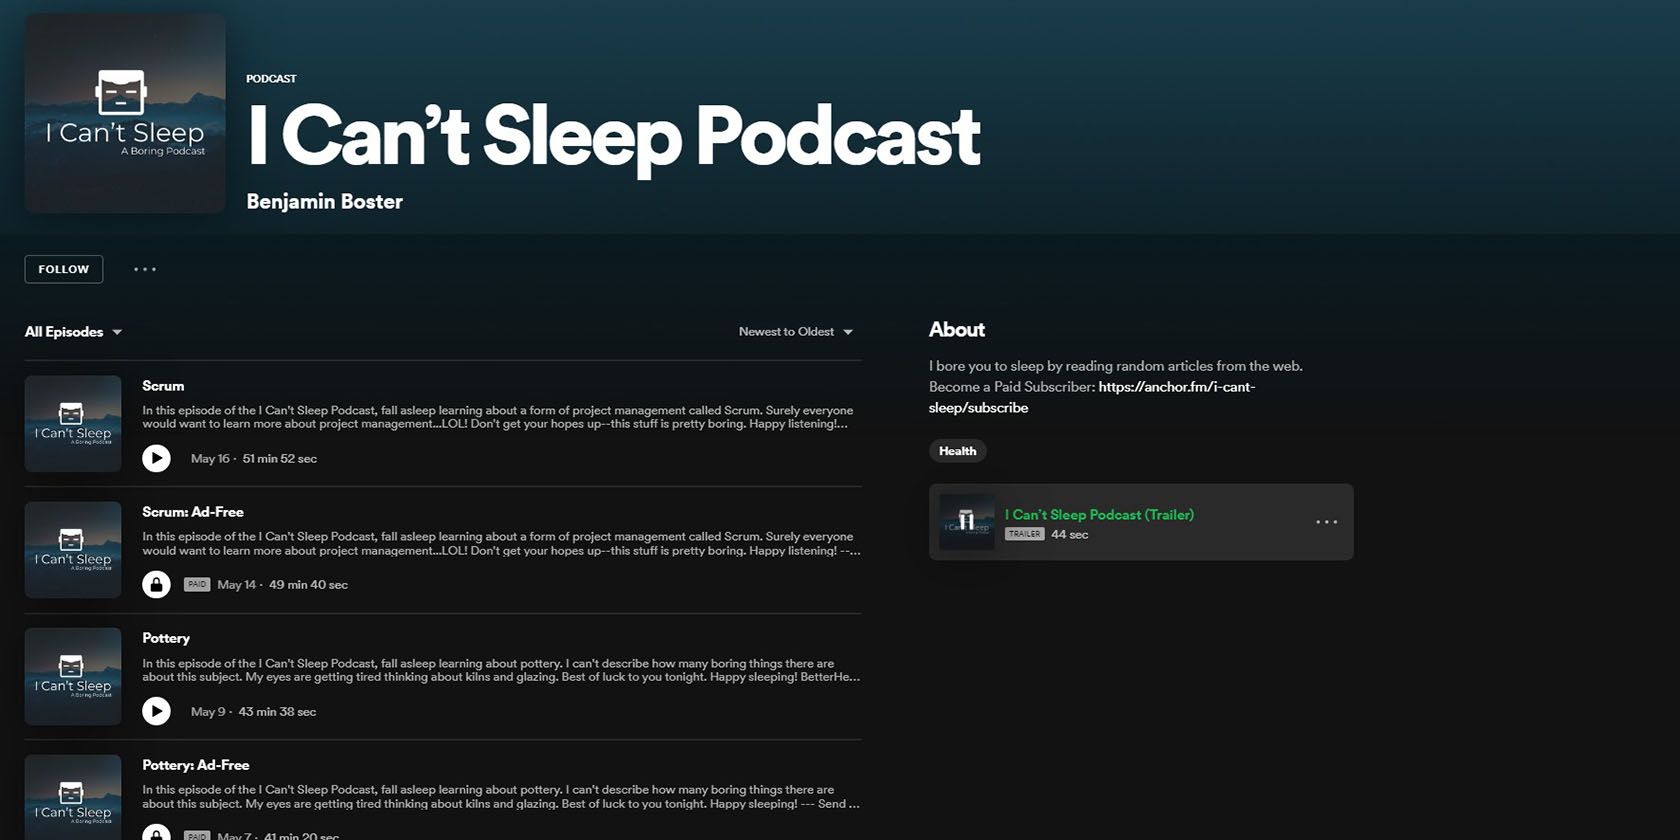 I Can't Sleep Podcast on Spotify